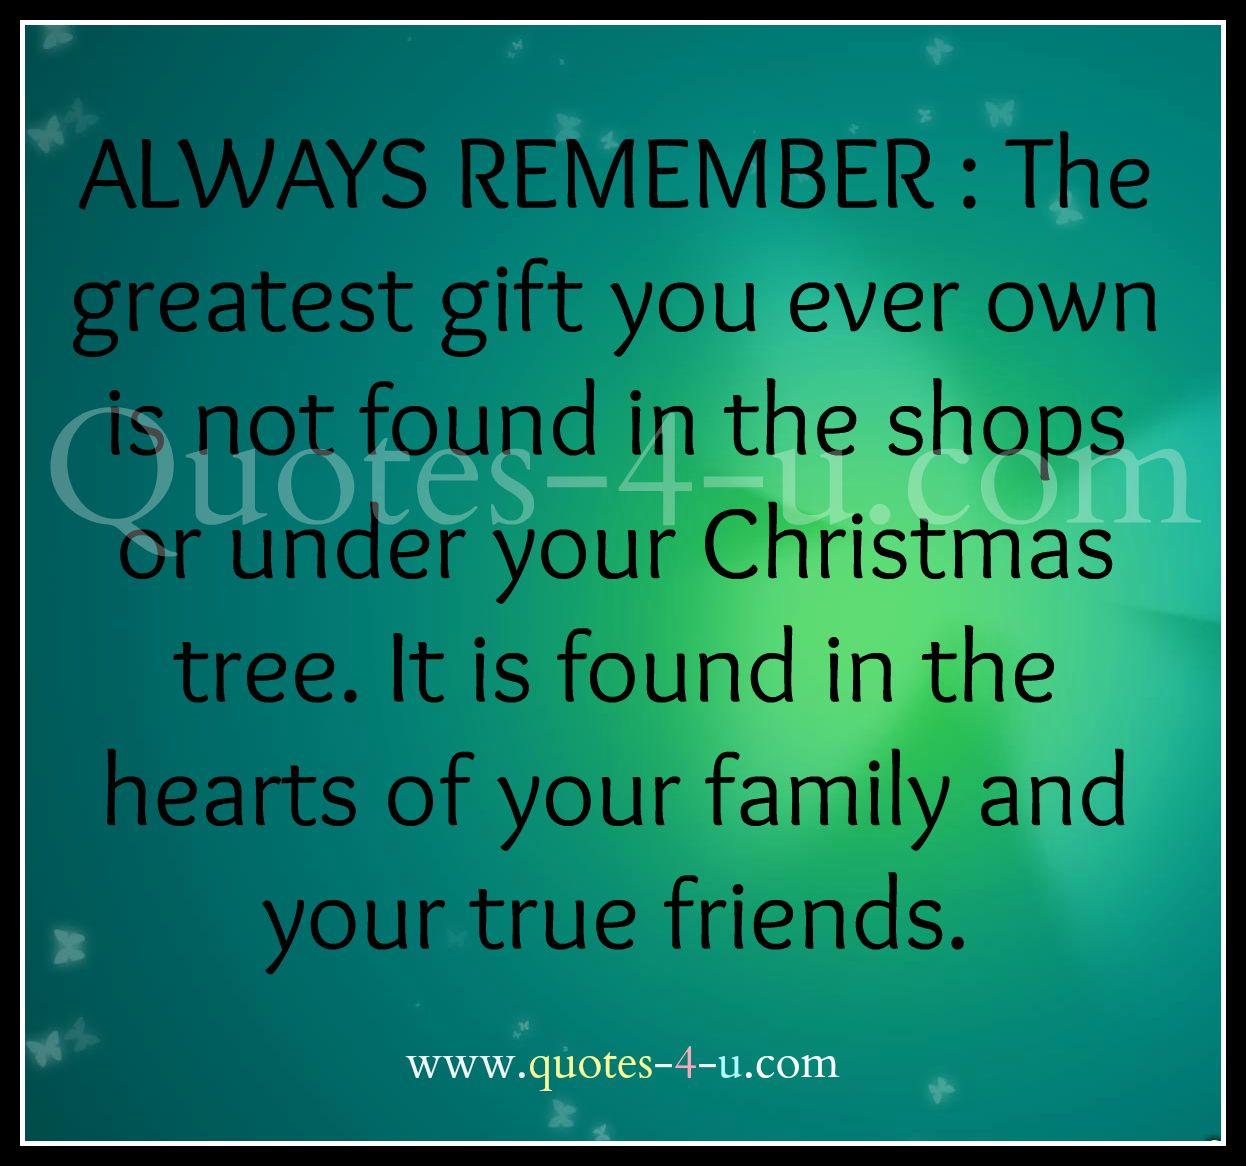 family friends inspirational quotes wallpapers Quotes About Friends